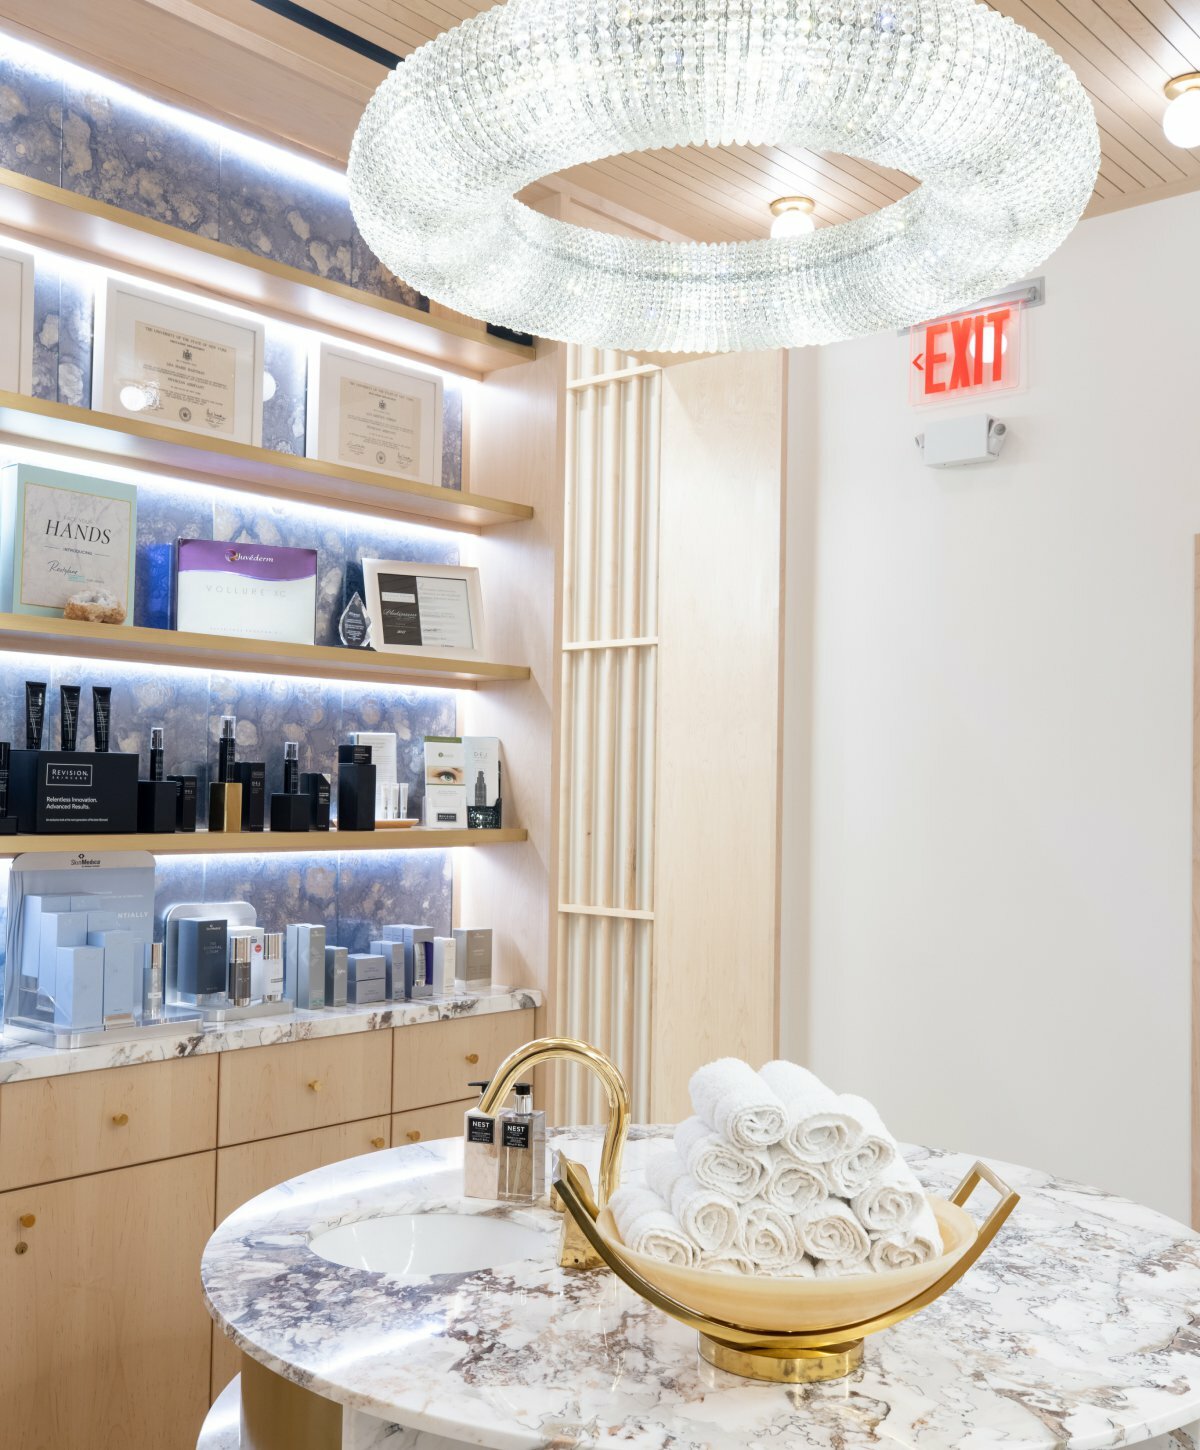 Soingez-Vous Med Spa NYC